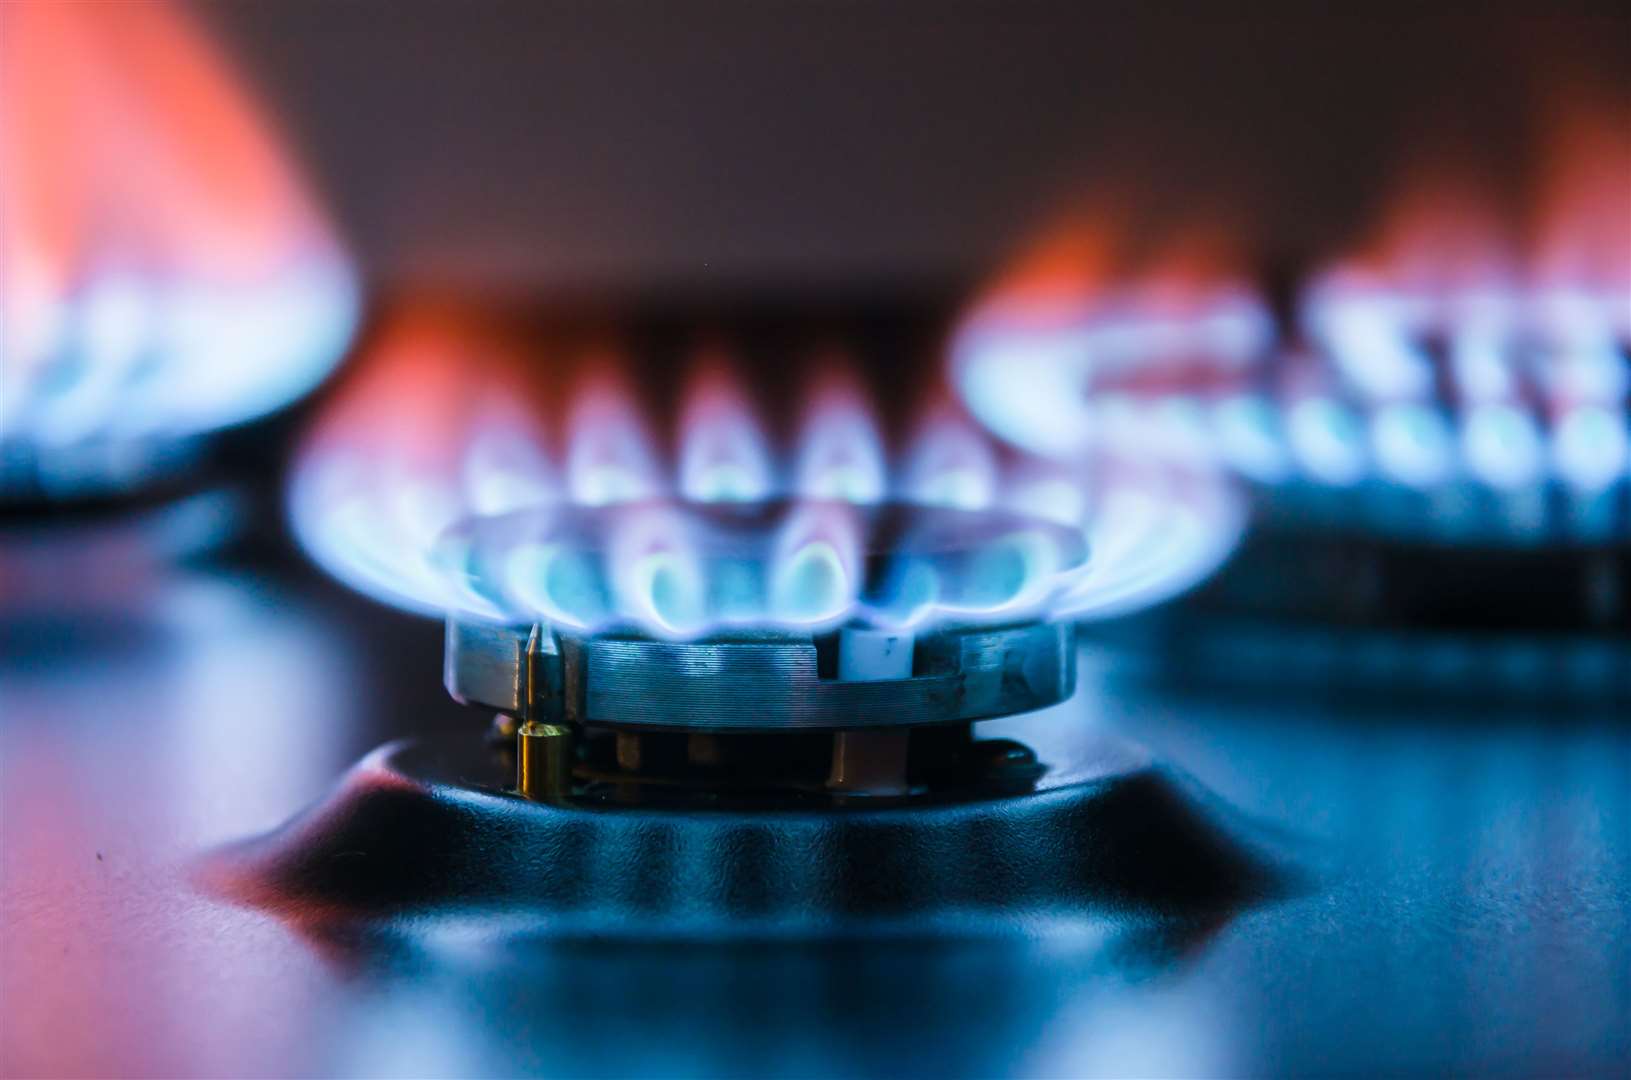 Households living 'off the gas grid' often struggle most to cope with fuel costs.